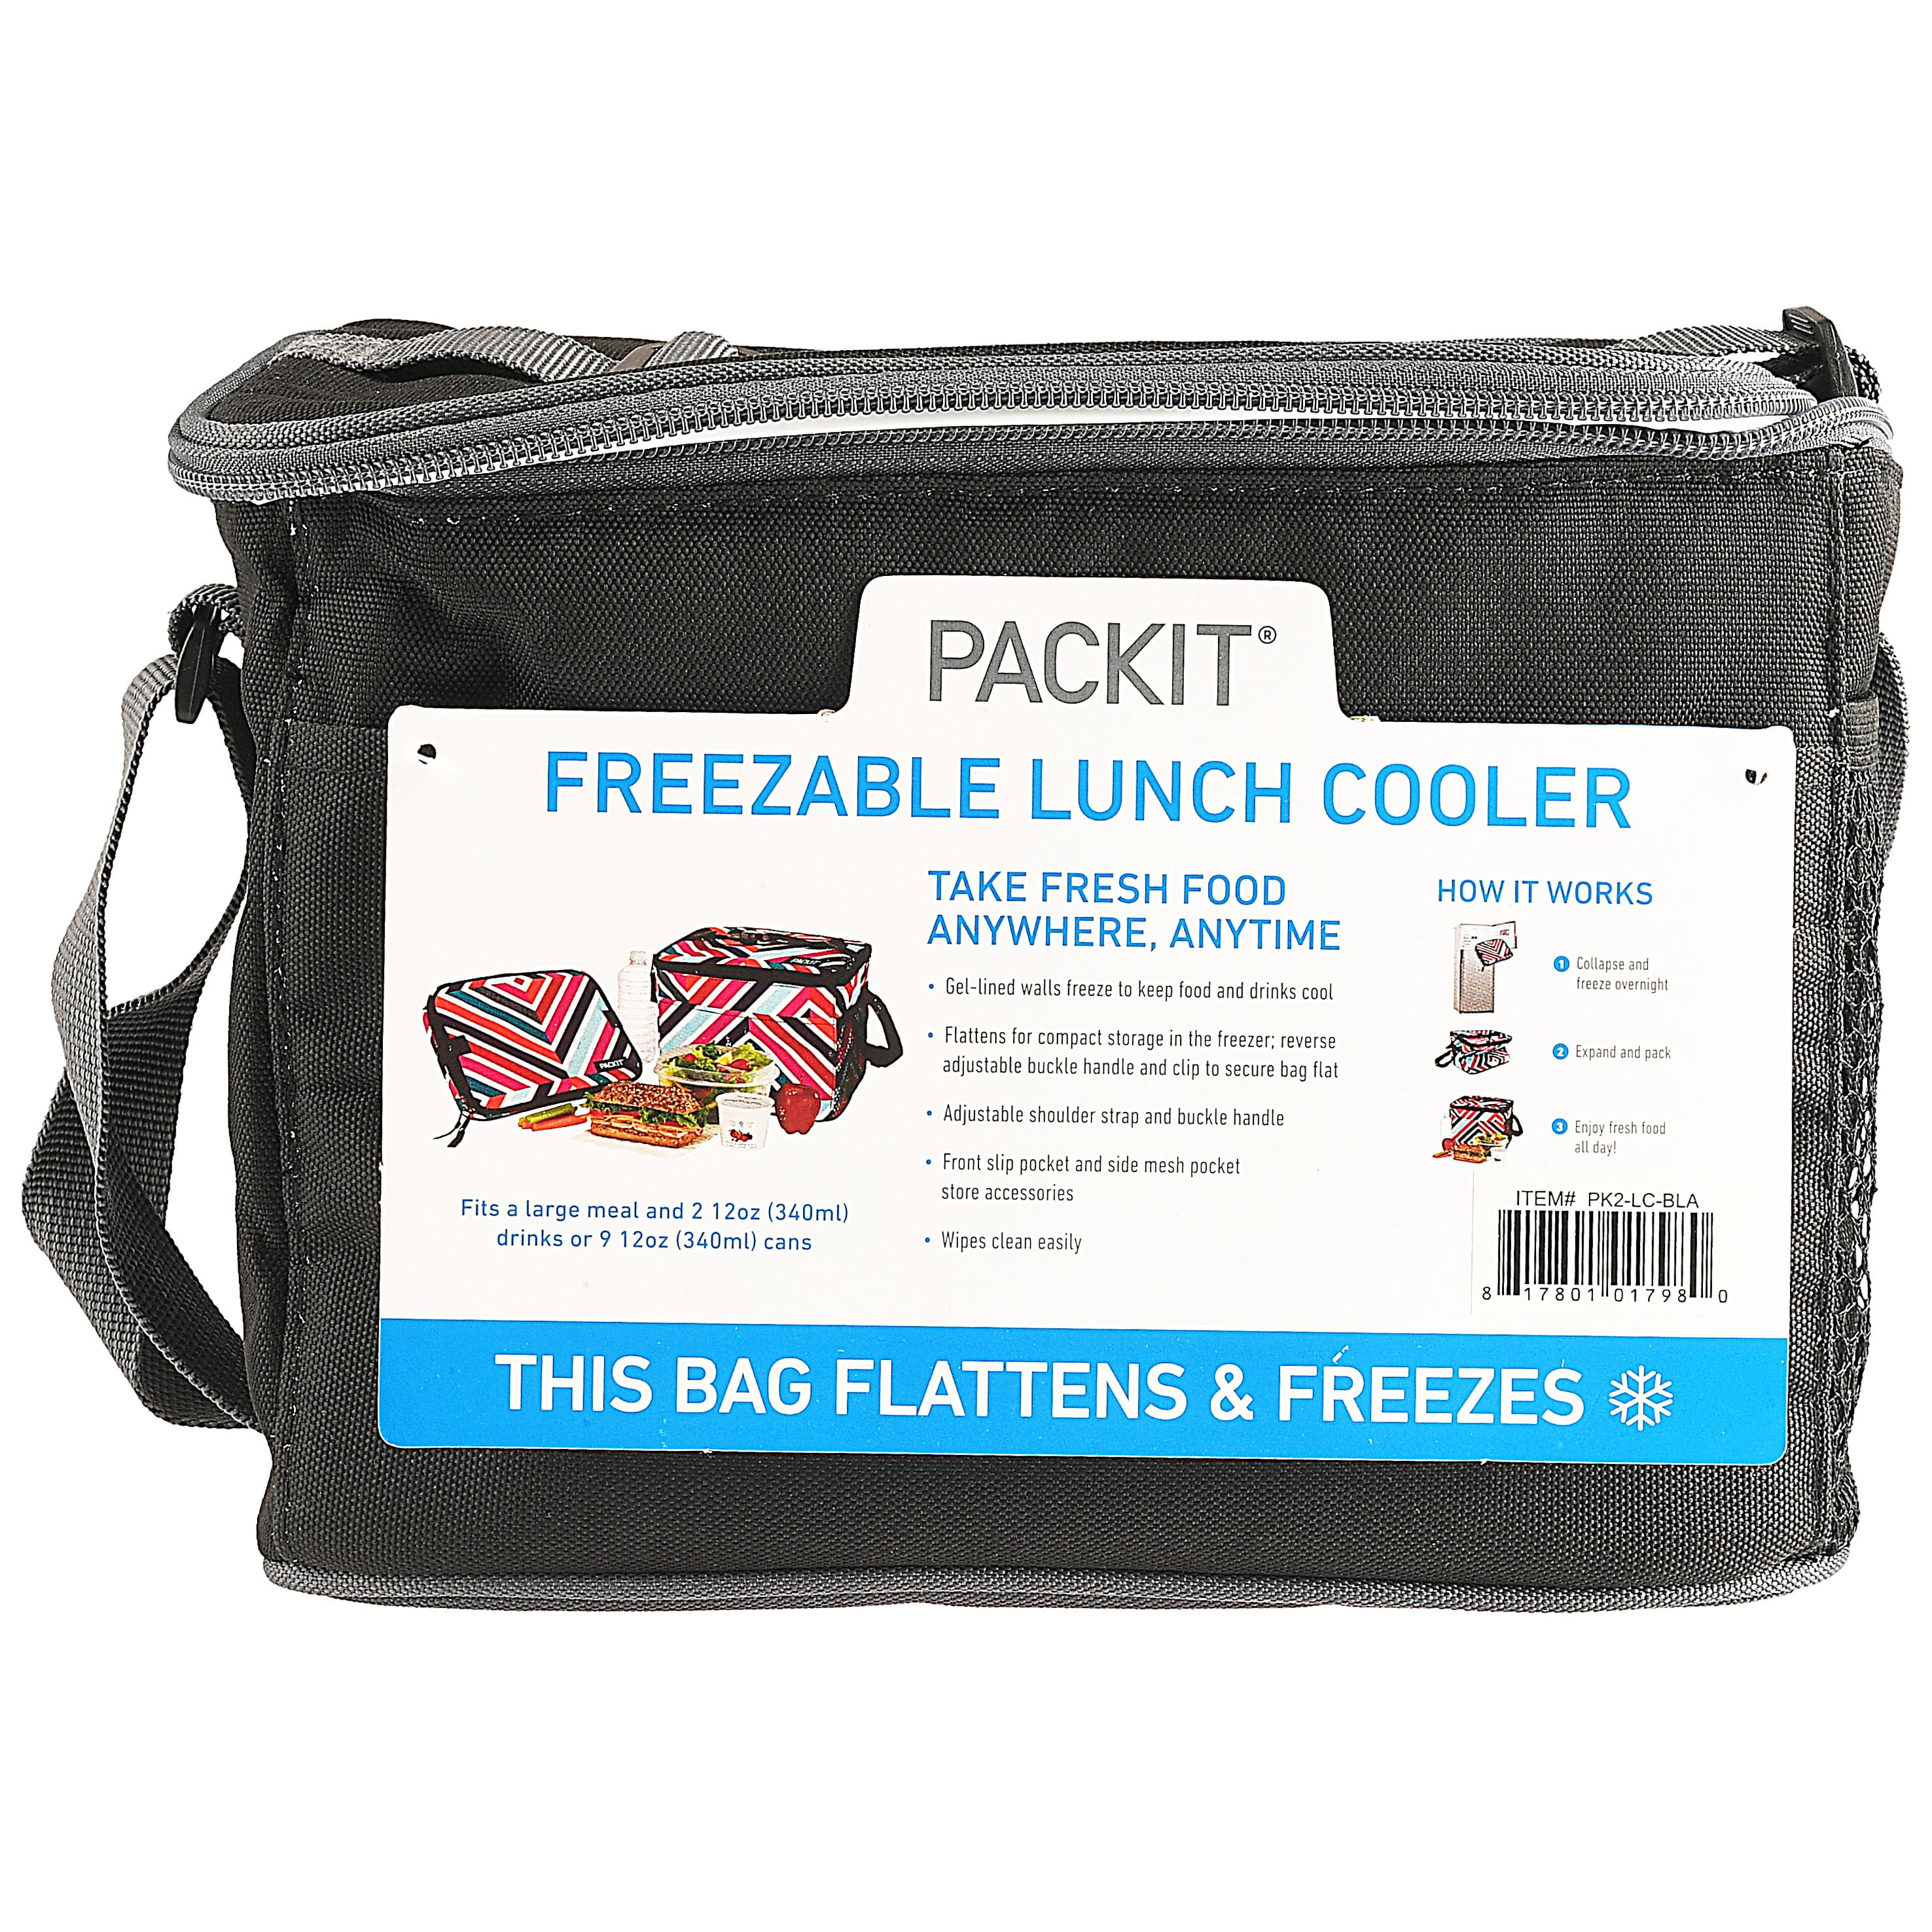 Packit Freezable Lunch Cooler - Walmart 